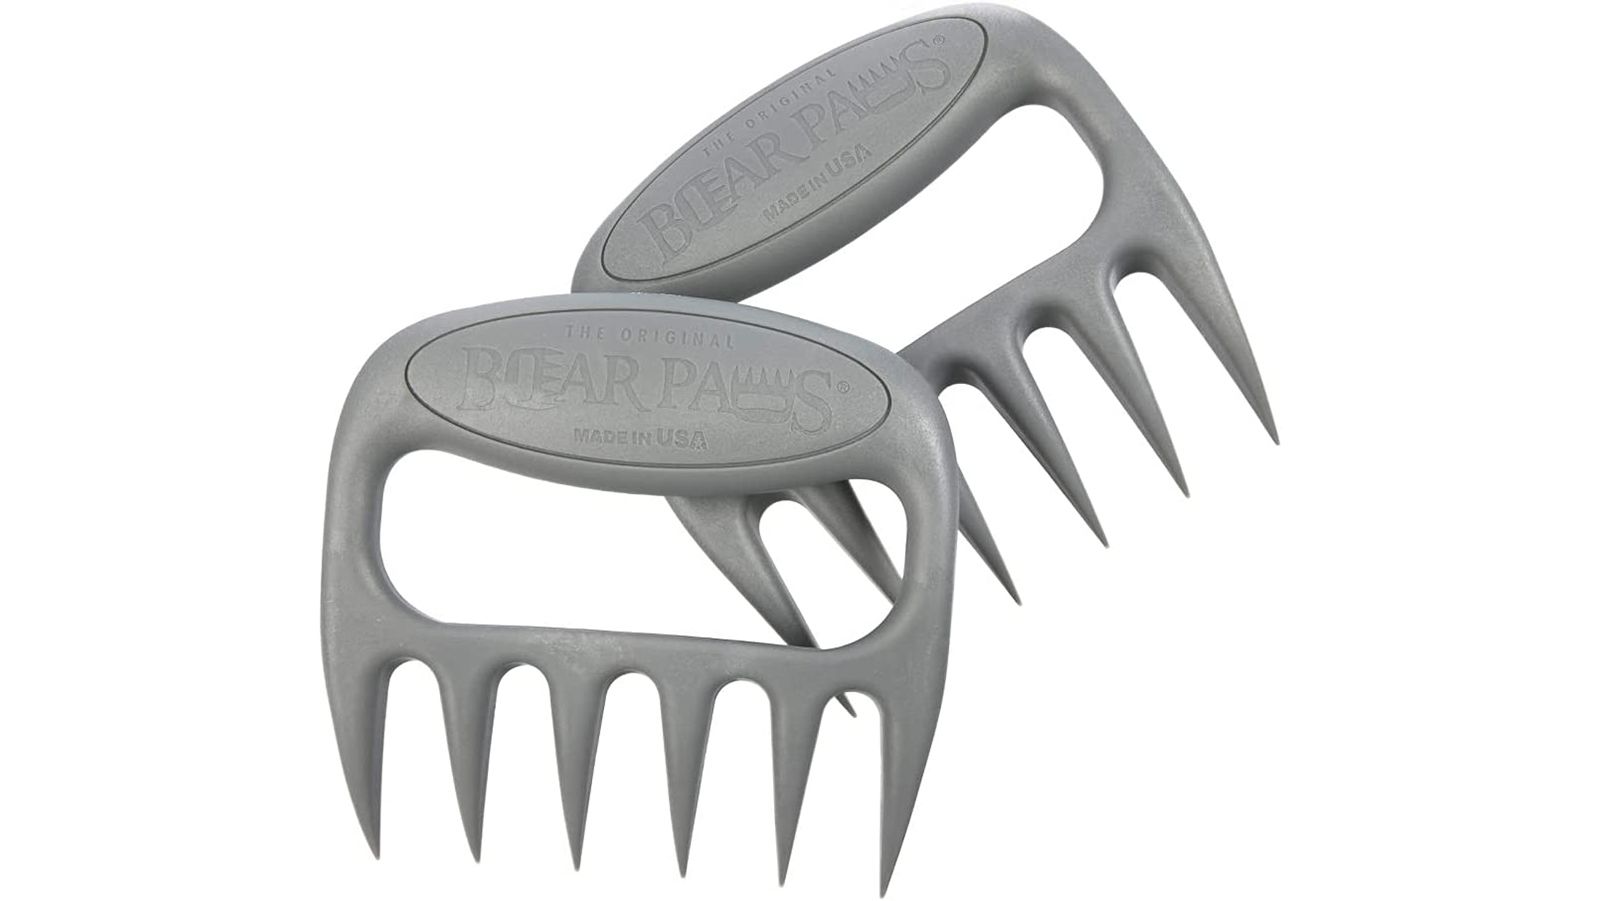  Meat Shredder Claws Shredding Stocking Stuffers for Men Women  White Elephant Gifts Christmas Adults Dad Teens Gag Funny Novelty Stuffer  Ideas Useful Gift BBQ Grilling Santa Unique Coolest Presents : Grocery